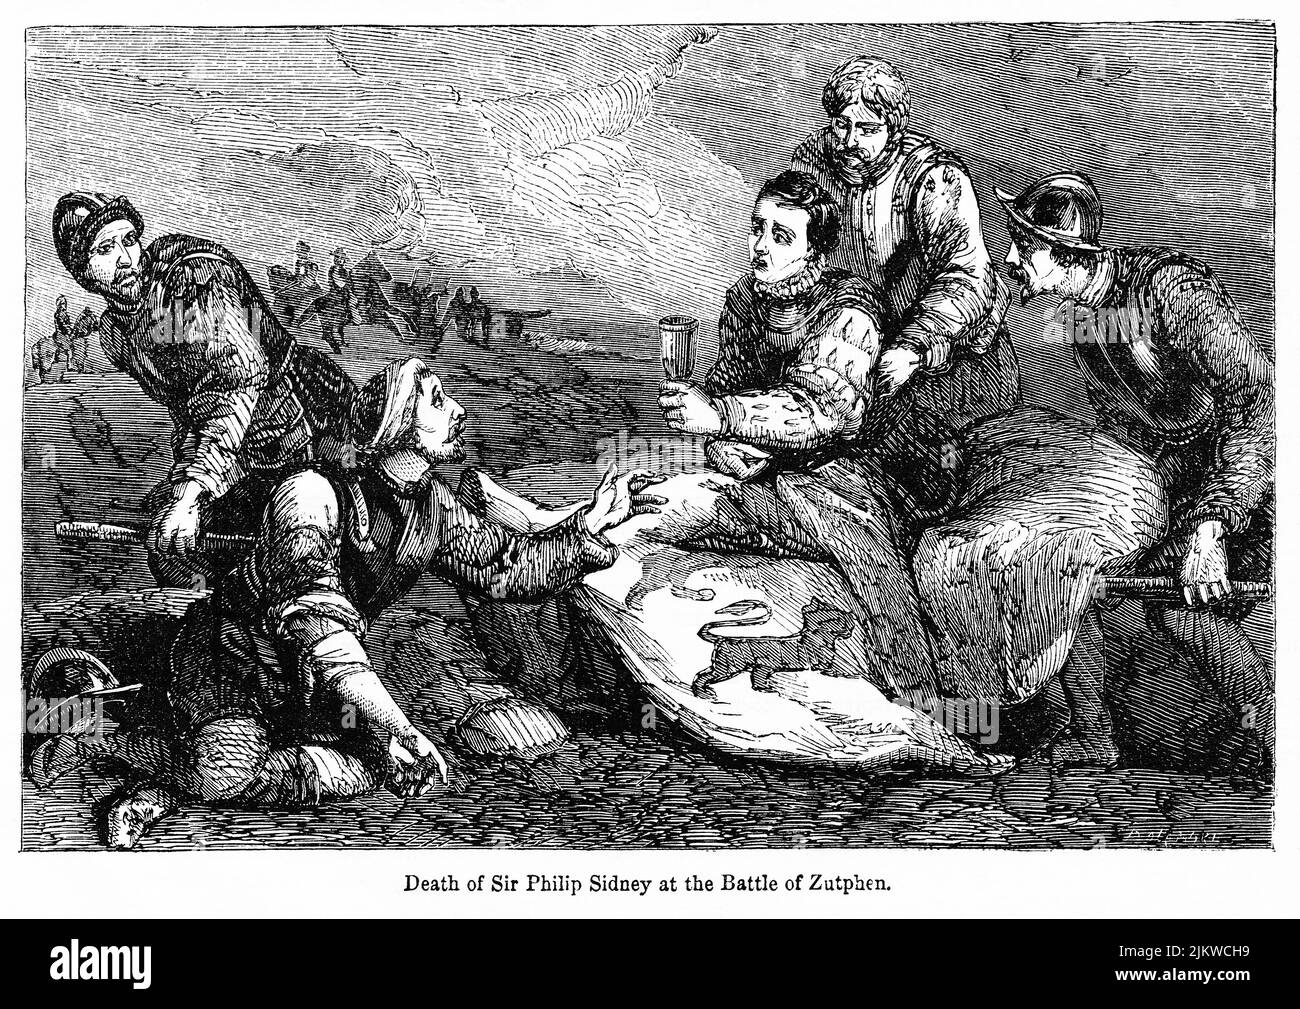 Death of Sir Philip Sidney at the Battle of Zutphen, Illustration from the Book, 'John Cassel’s Illustrated History of England, Volume II', text by William Howitt, Cassell, Petter, and Galpin, London, 1858 Stock Photo